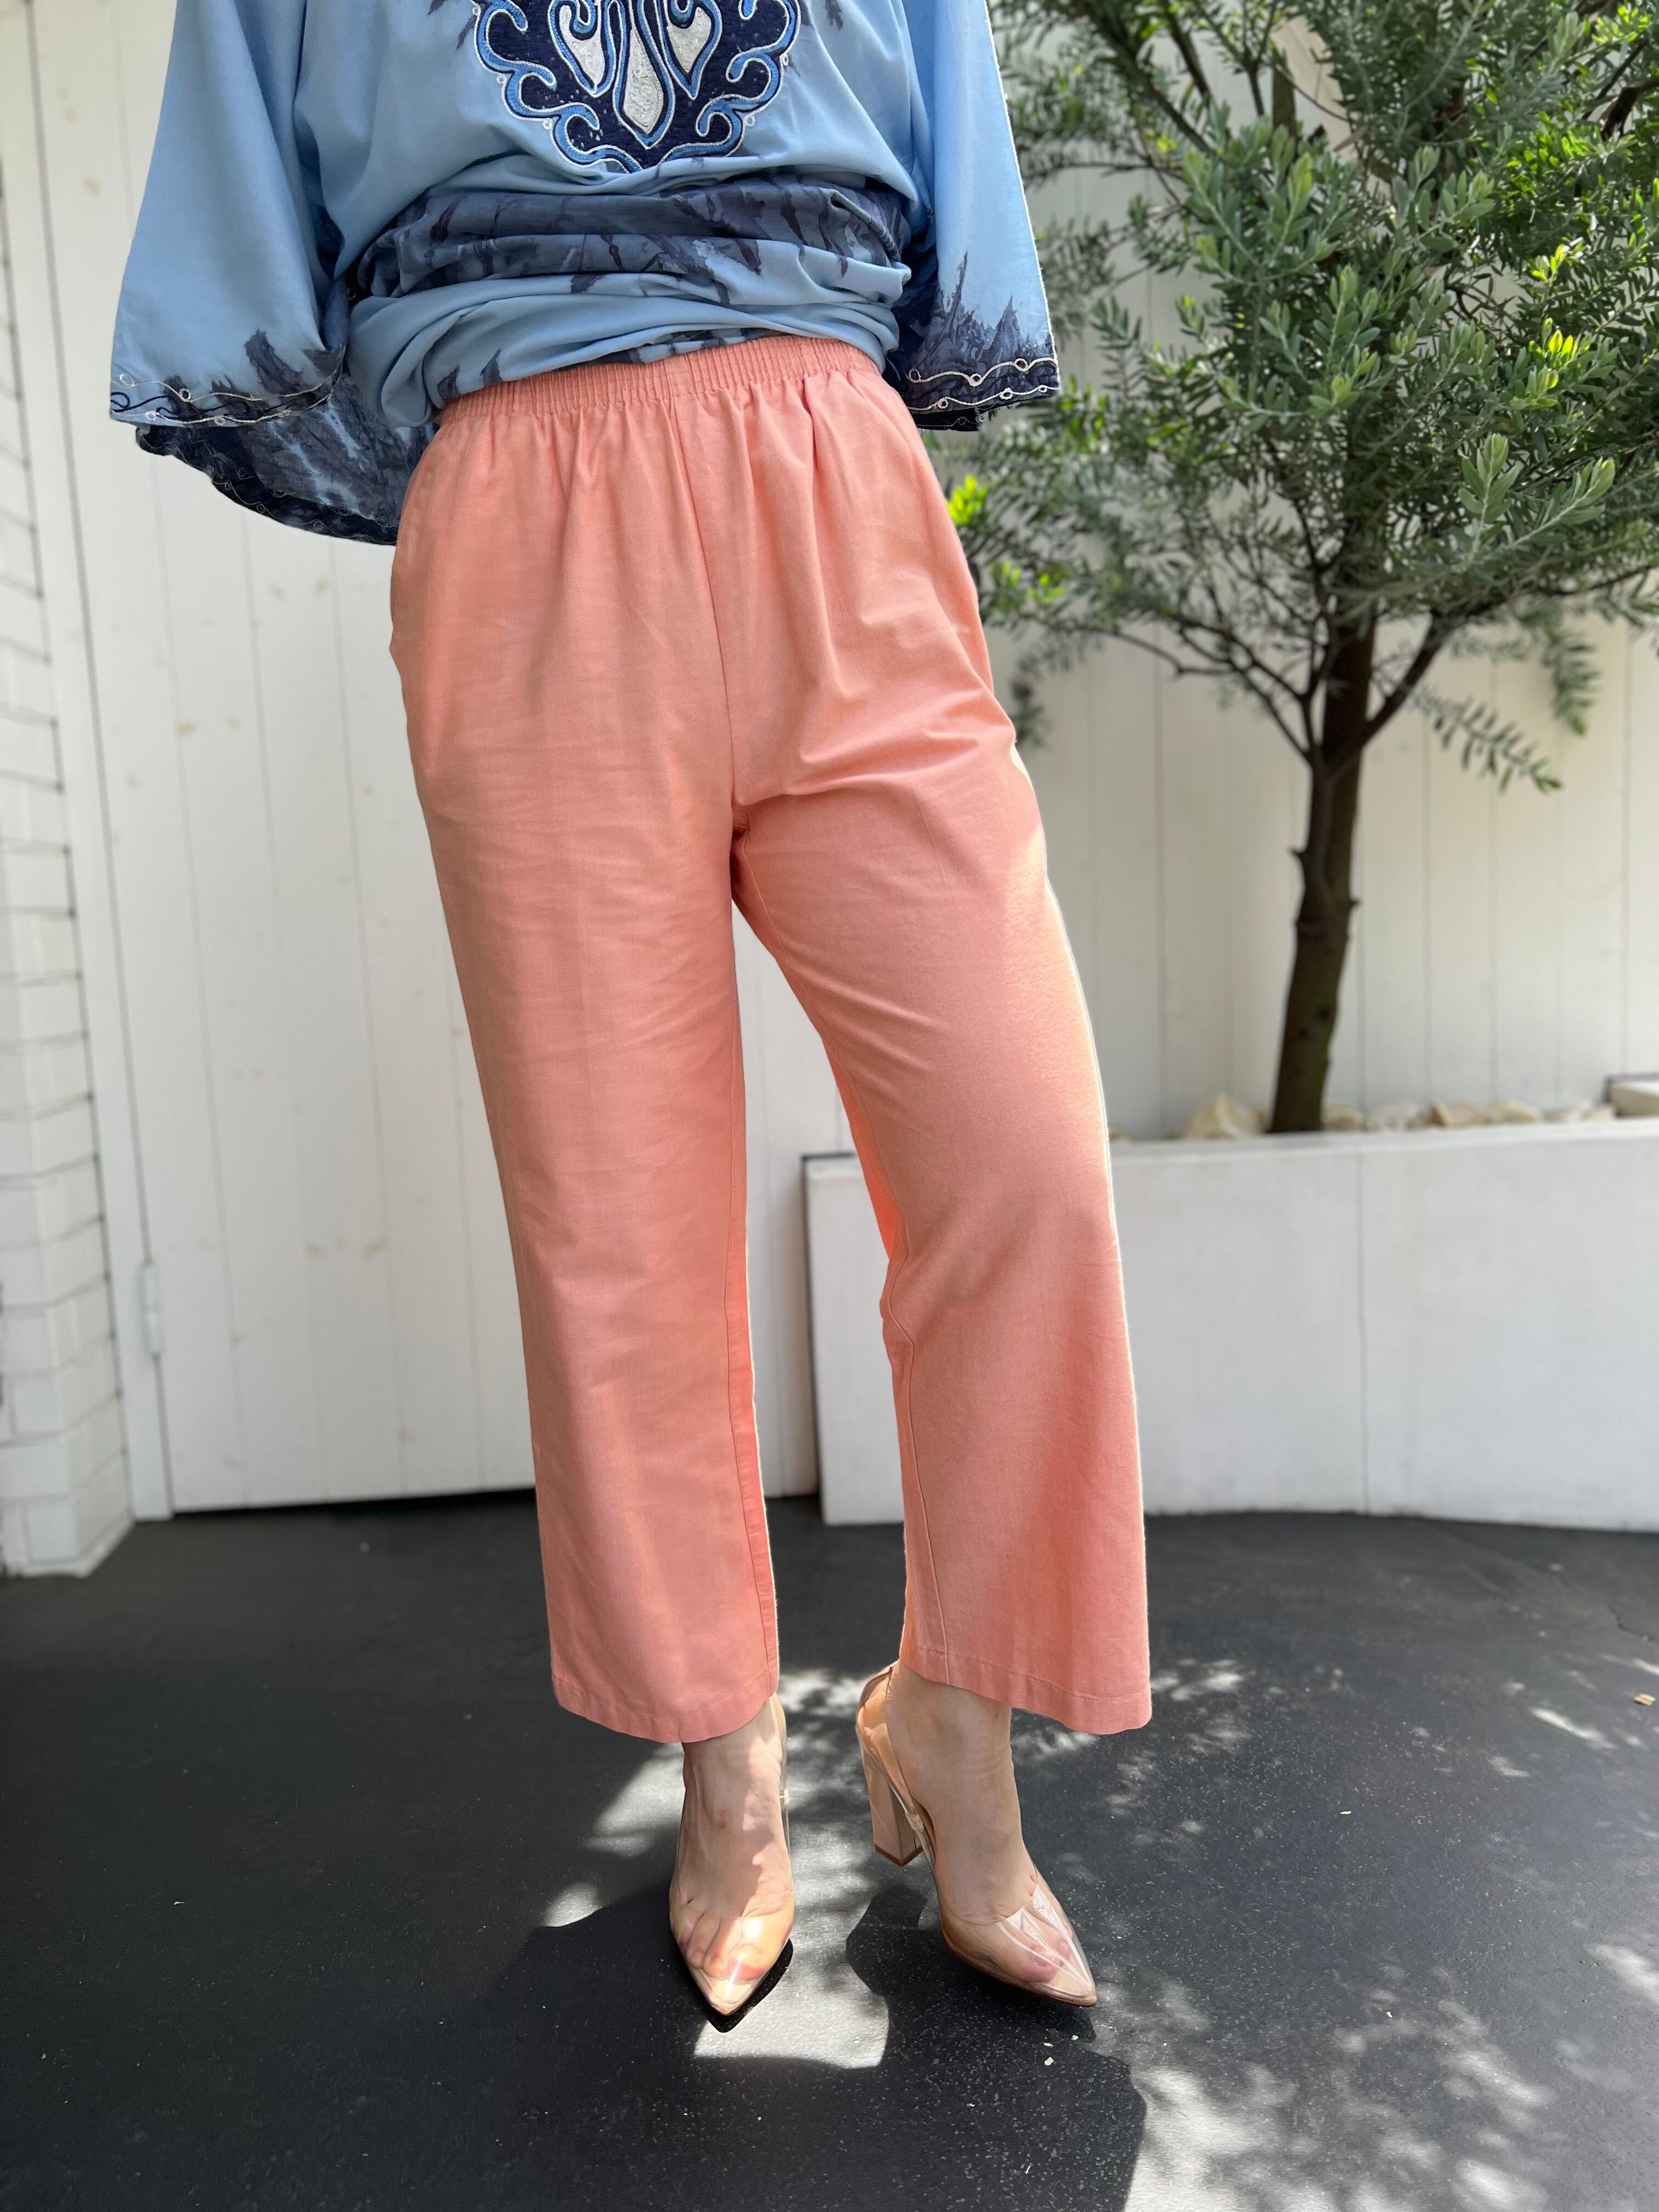 Vintage salmon pink simple cotton poly pants ( ヴィンテージ サーモンピンク コットン × ポリ パンツ )